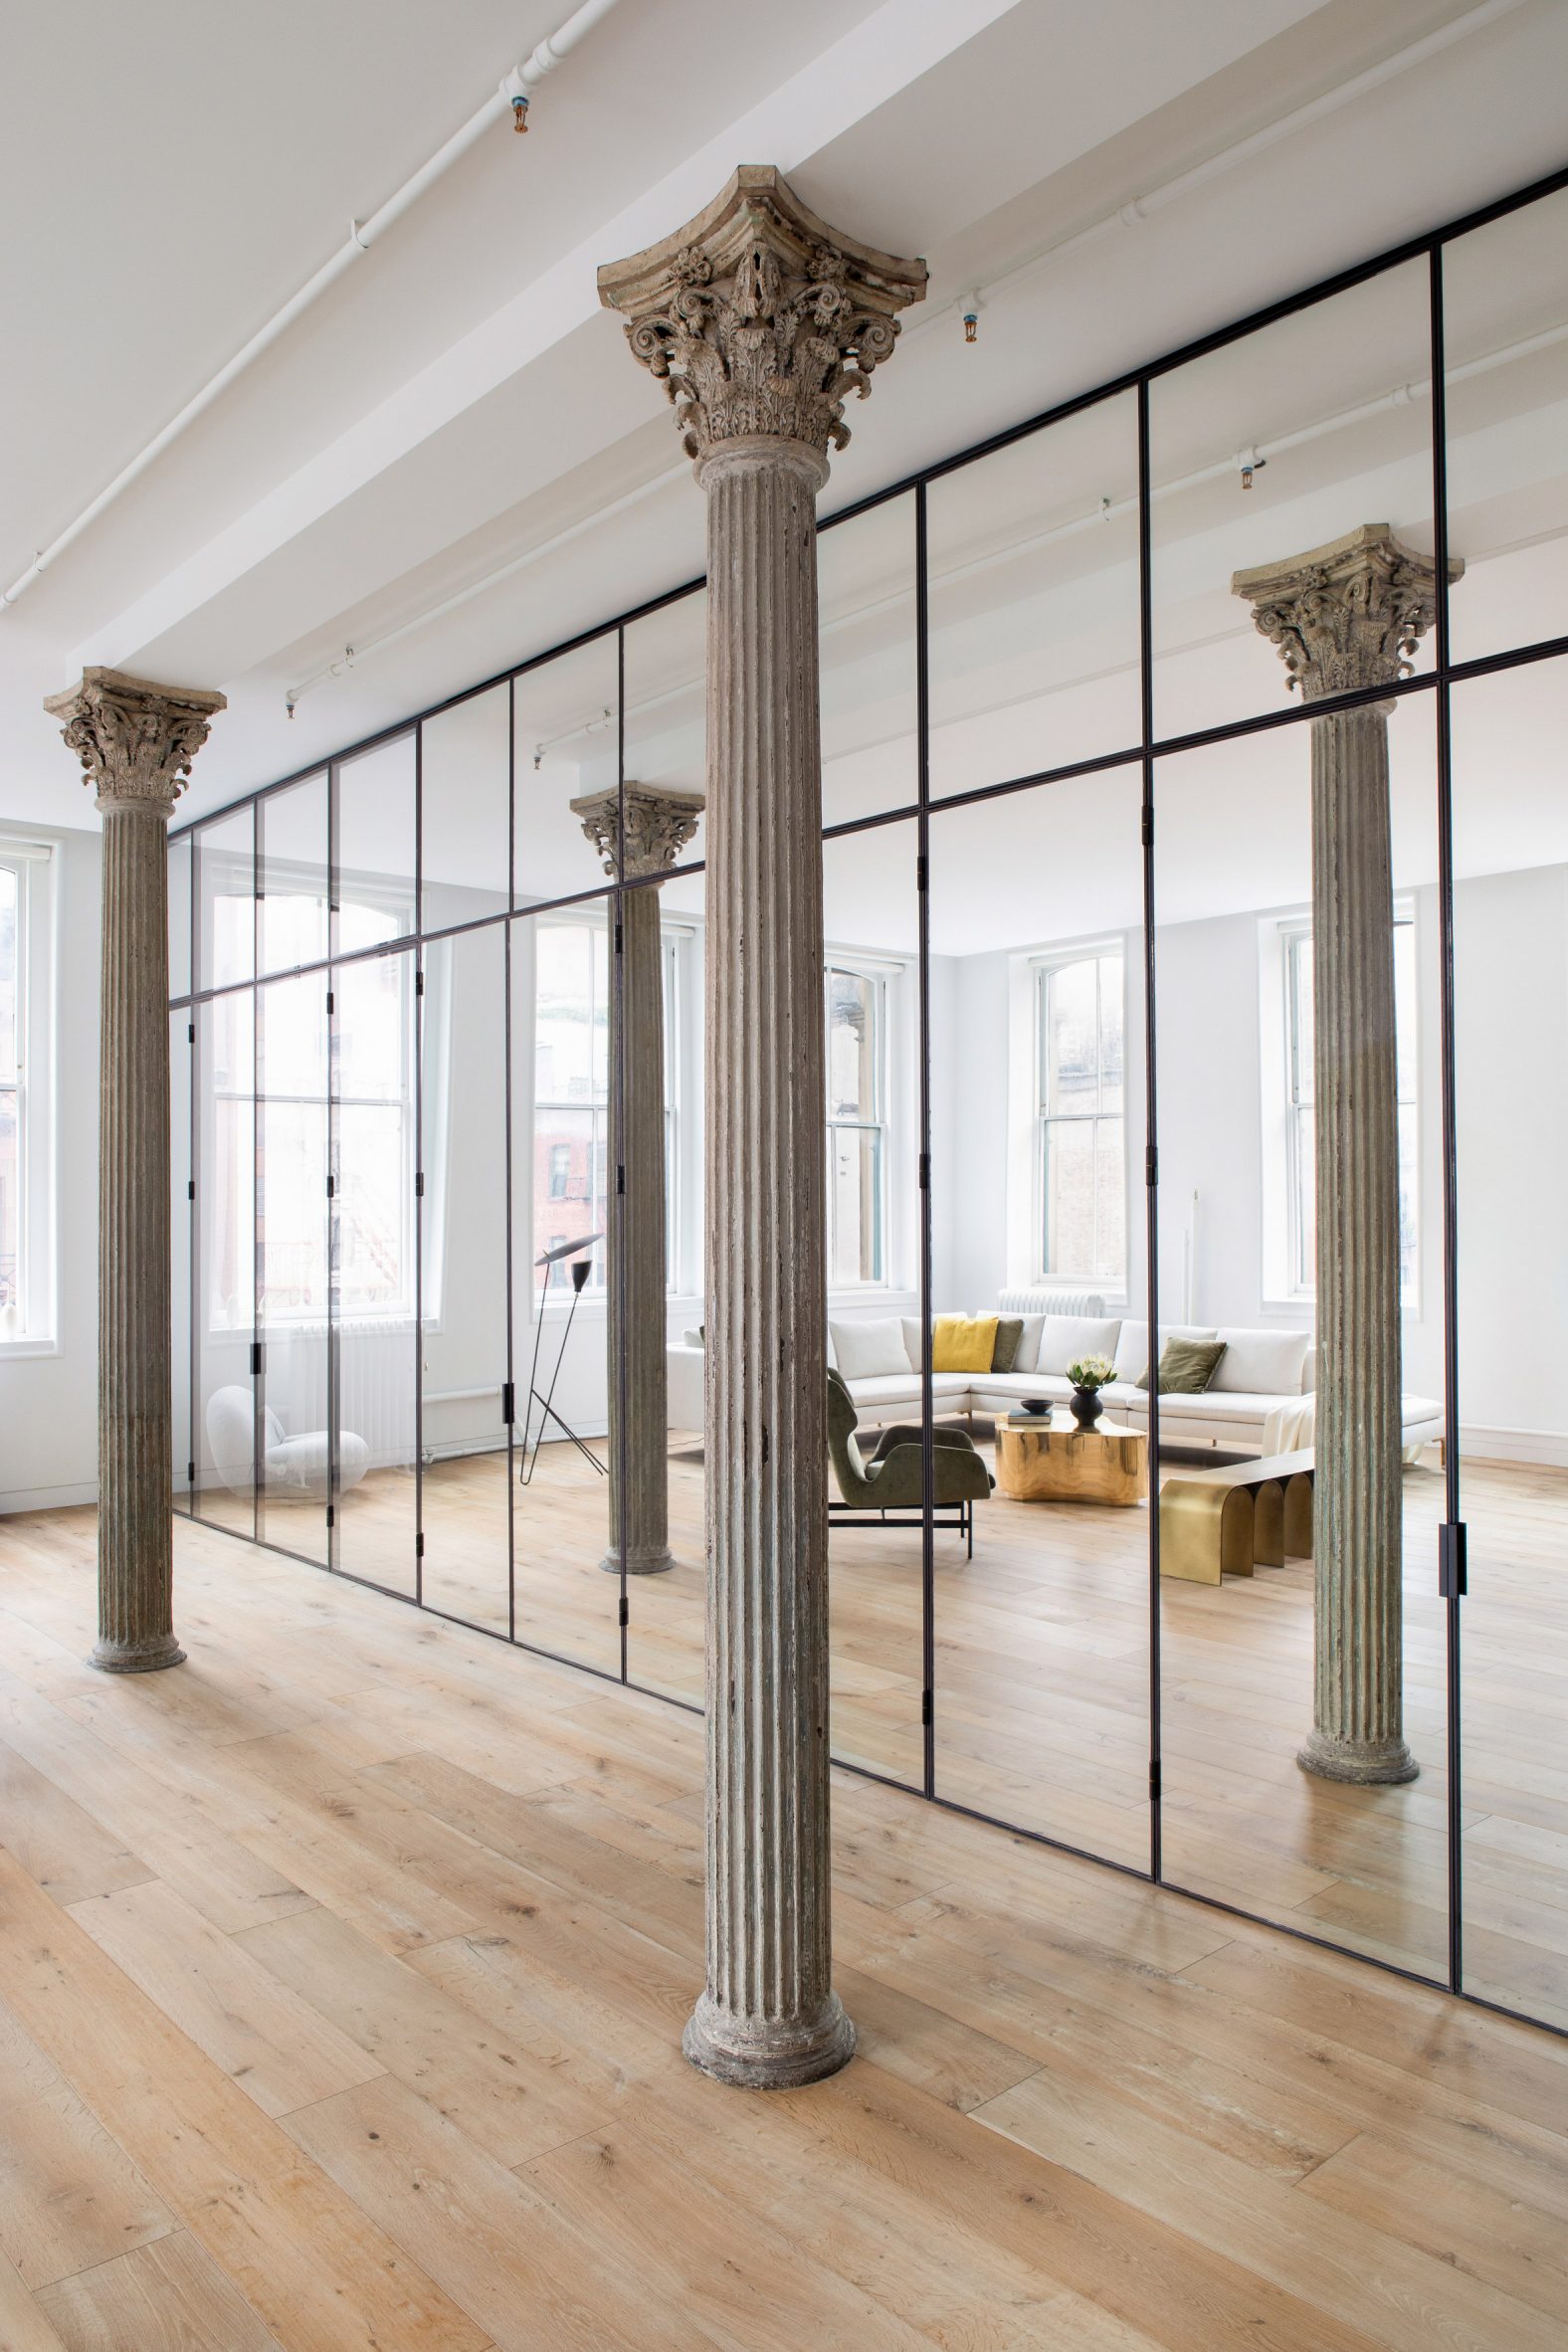 Cast-iron columns in front of mirrored wall